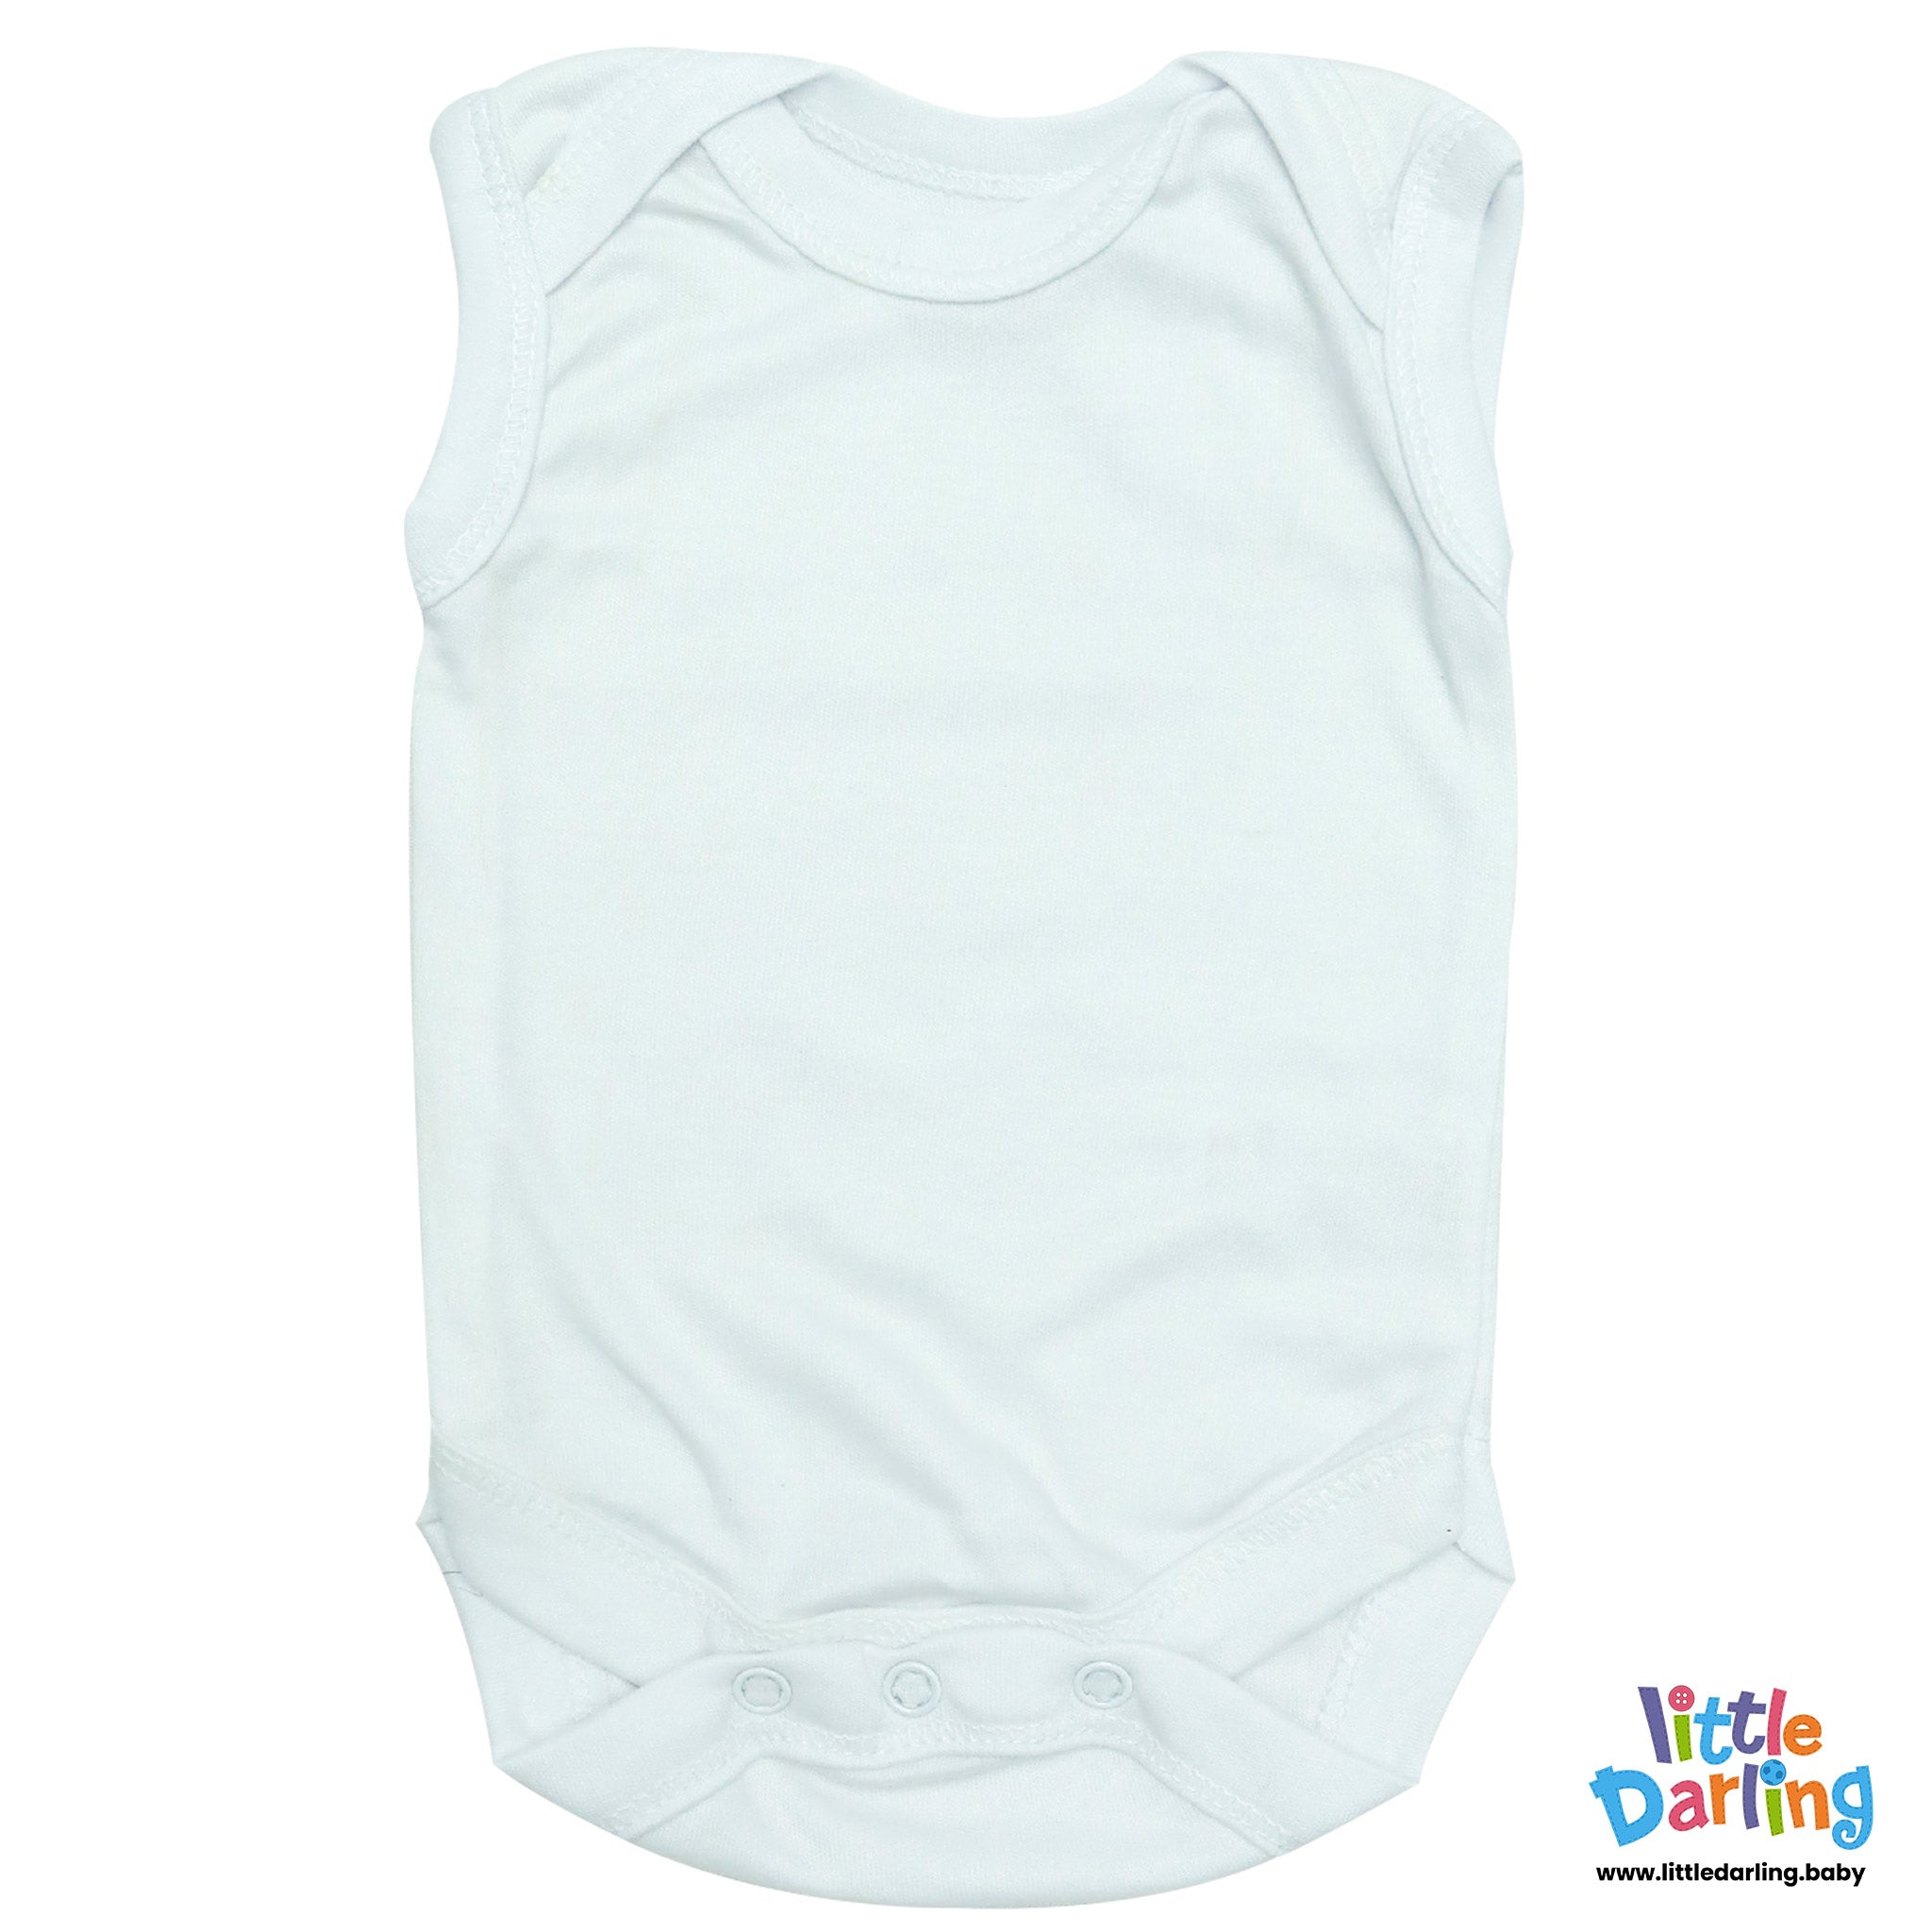 Bodysuit Pack Of 3 Sleeveless White Color by Little Darling